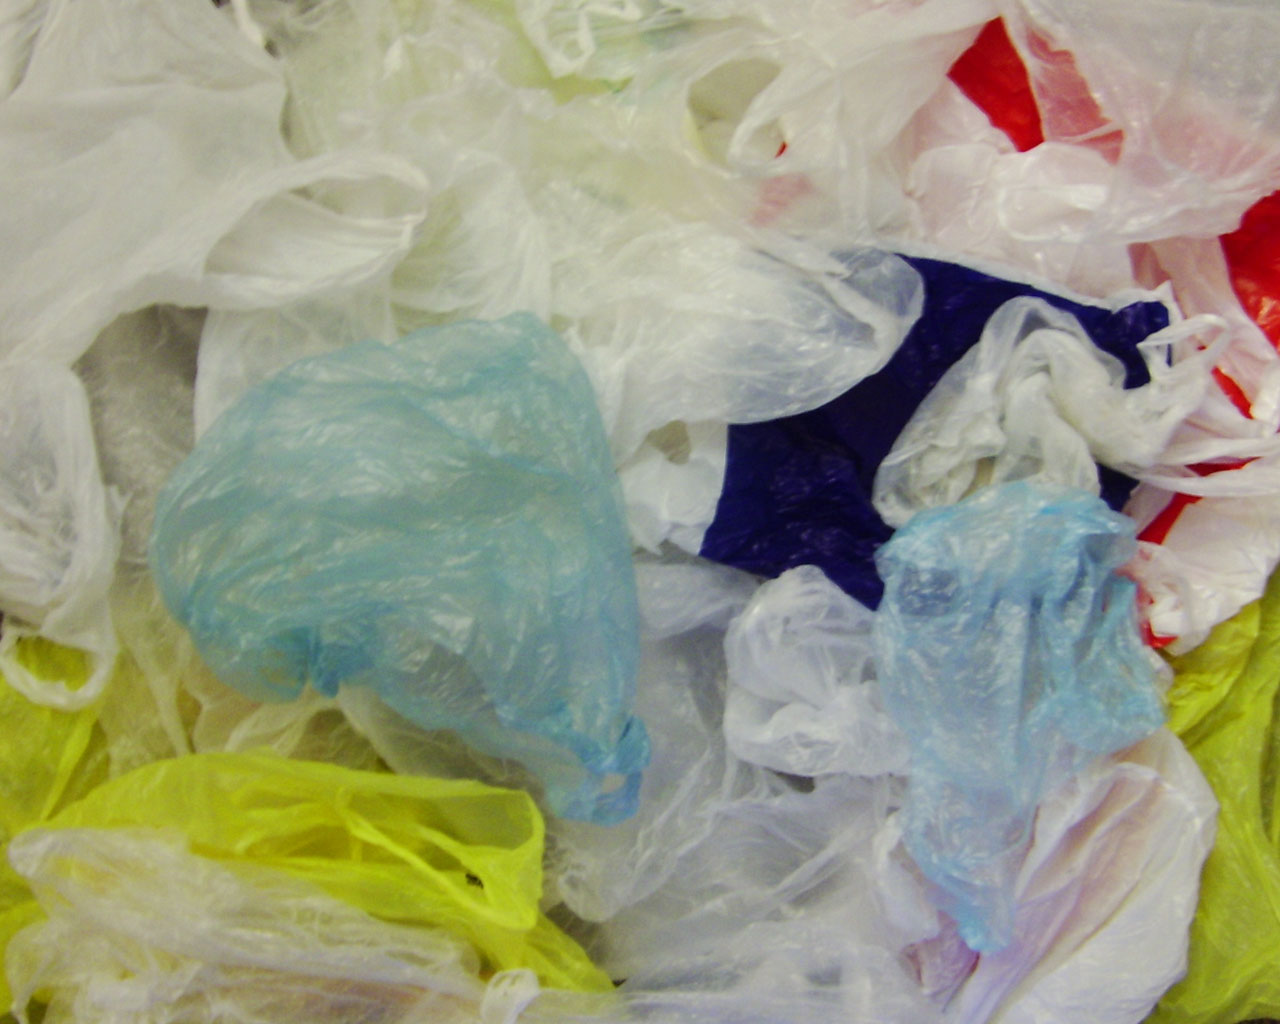 Landmark Plastic Bag Ban in California Gives Hope That Many More Will Follow